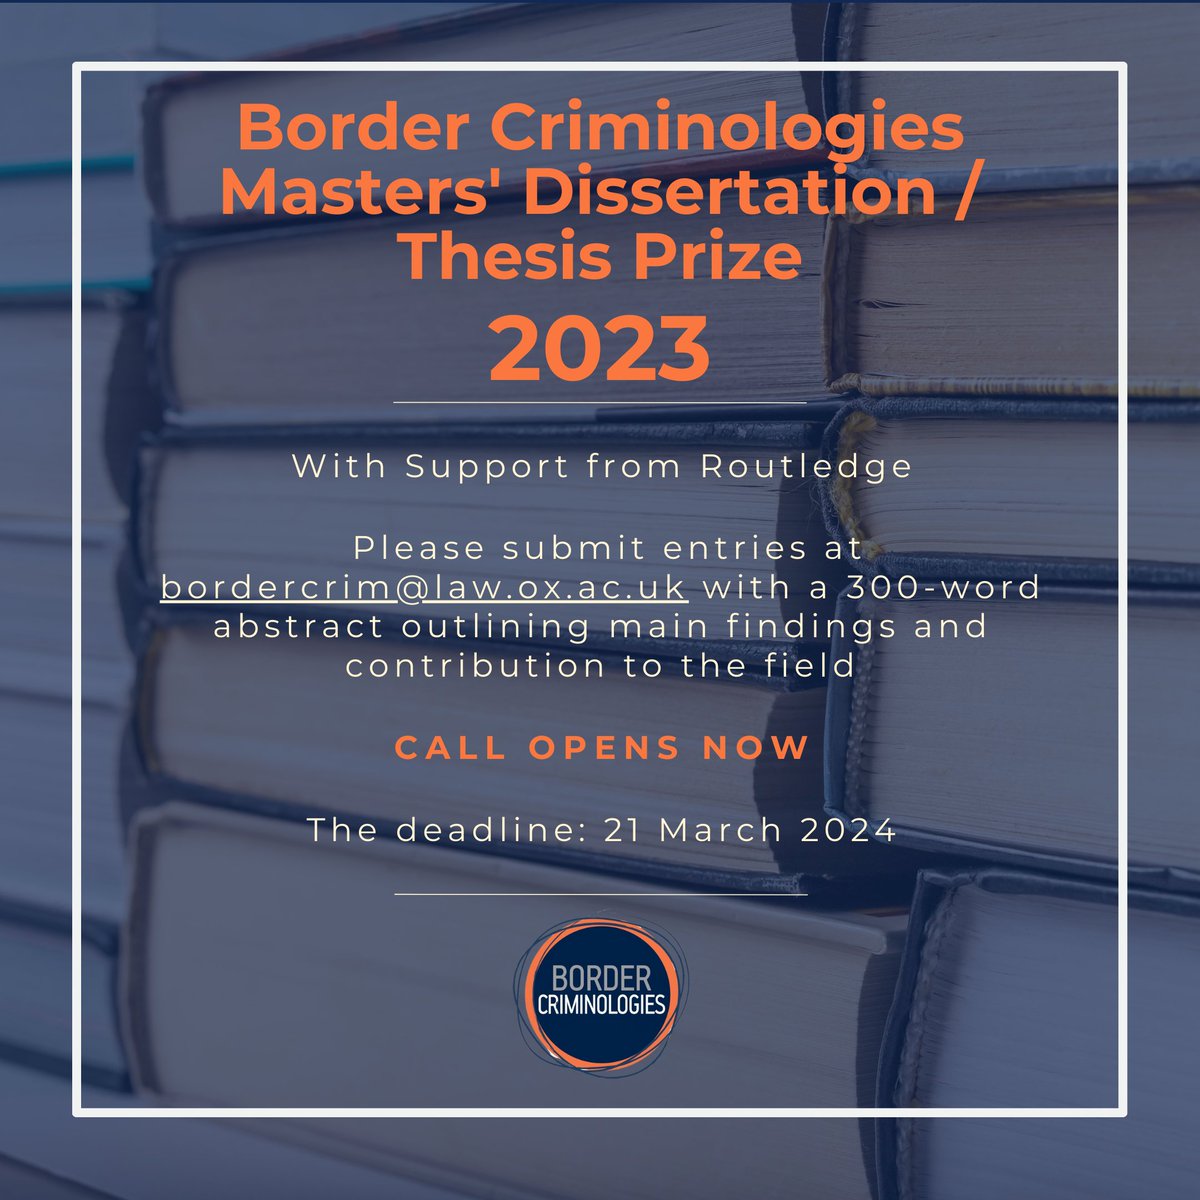 [📢 First Call for Entries!] The two recipients of the Prize will receive £200 and £100 worth of Routledge books and invitations to write about their research on our blog! Share the news! For more info: law.ox.ac.uk/content/news/b…